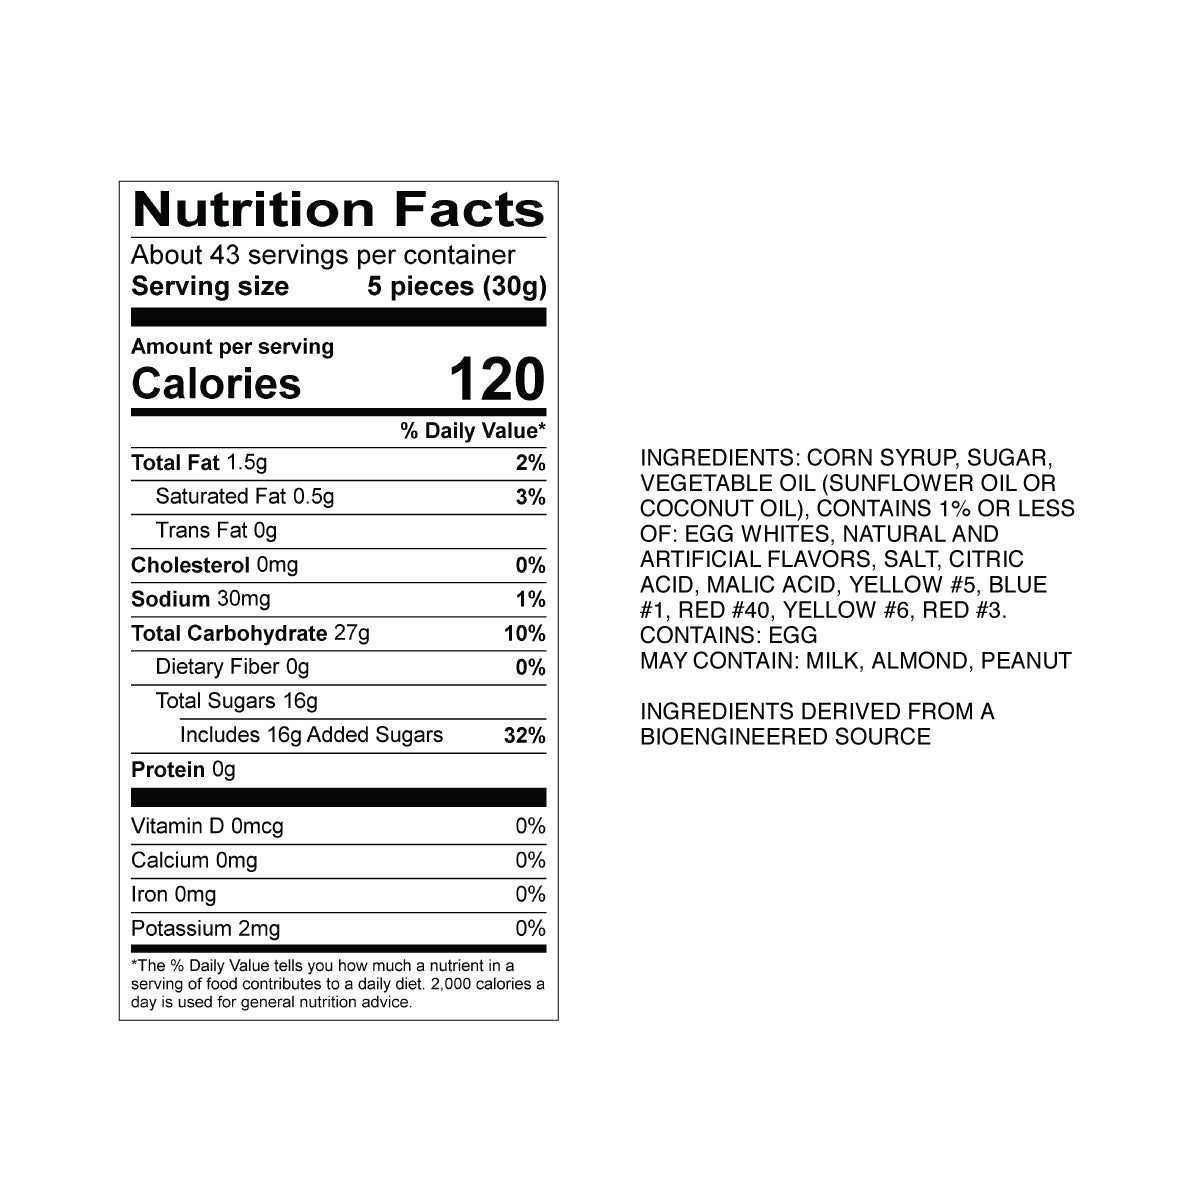 Sweet's Trade Winds Taffy Nutrition Fact Panel & Ingredients for the NET WT 2.82LB (1.28kg) Bulk Bag